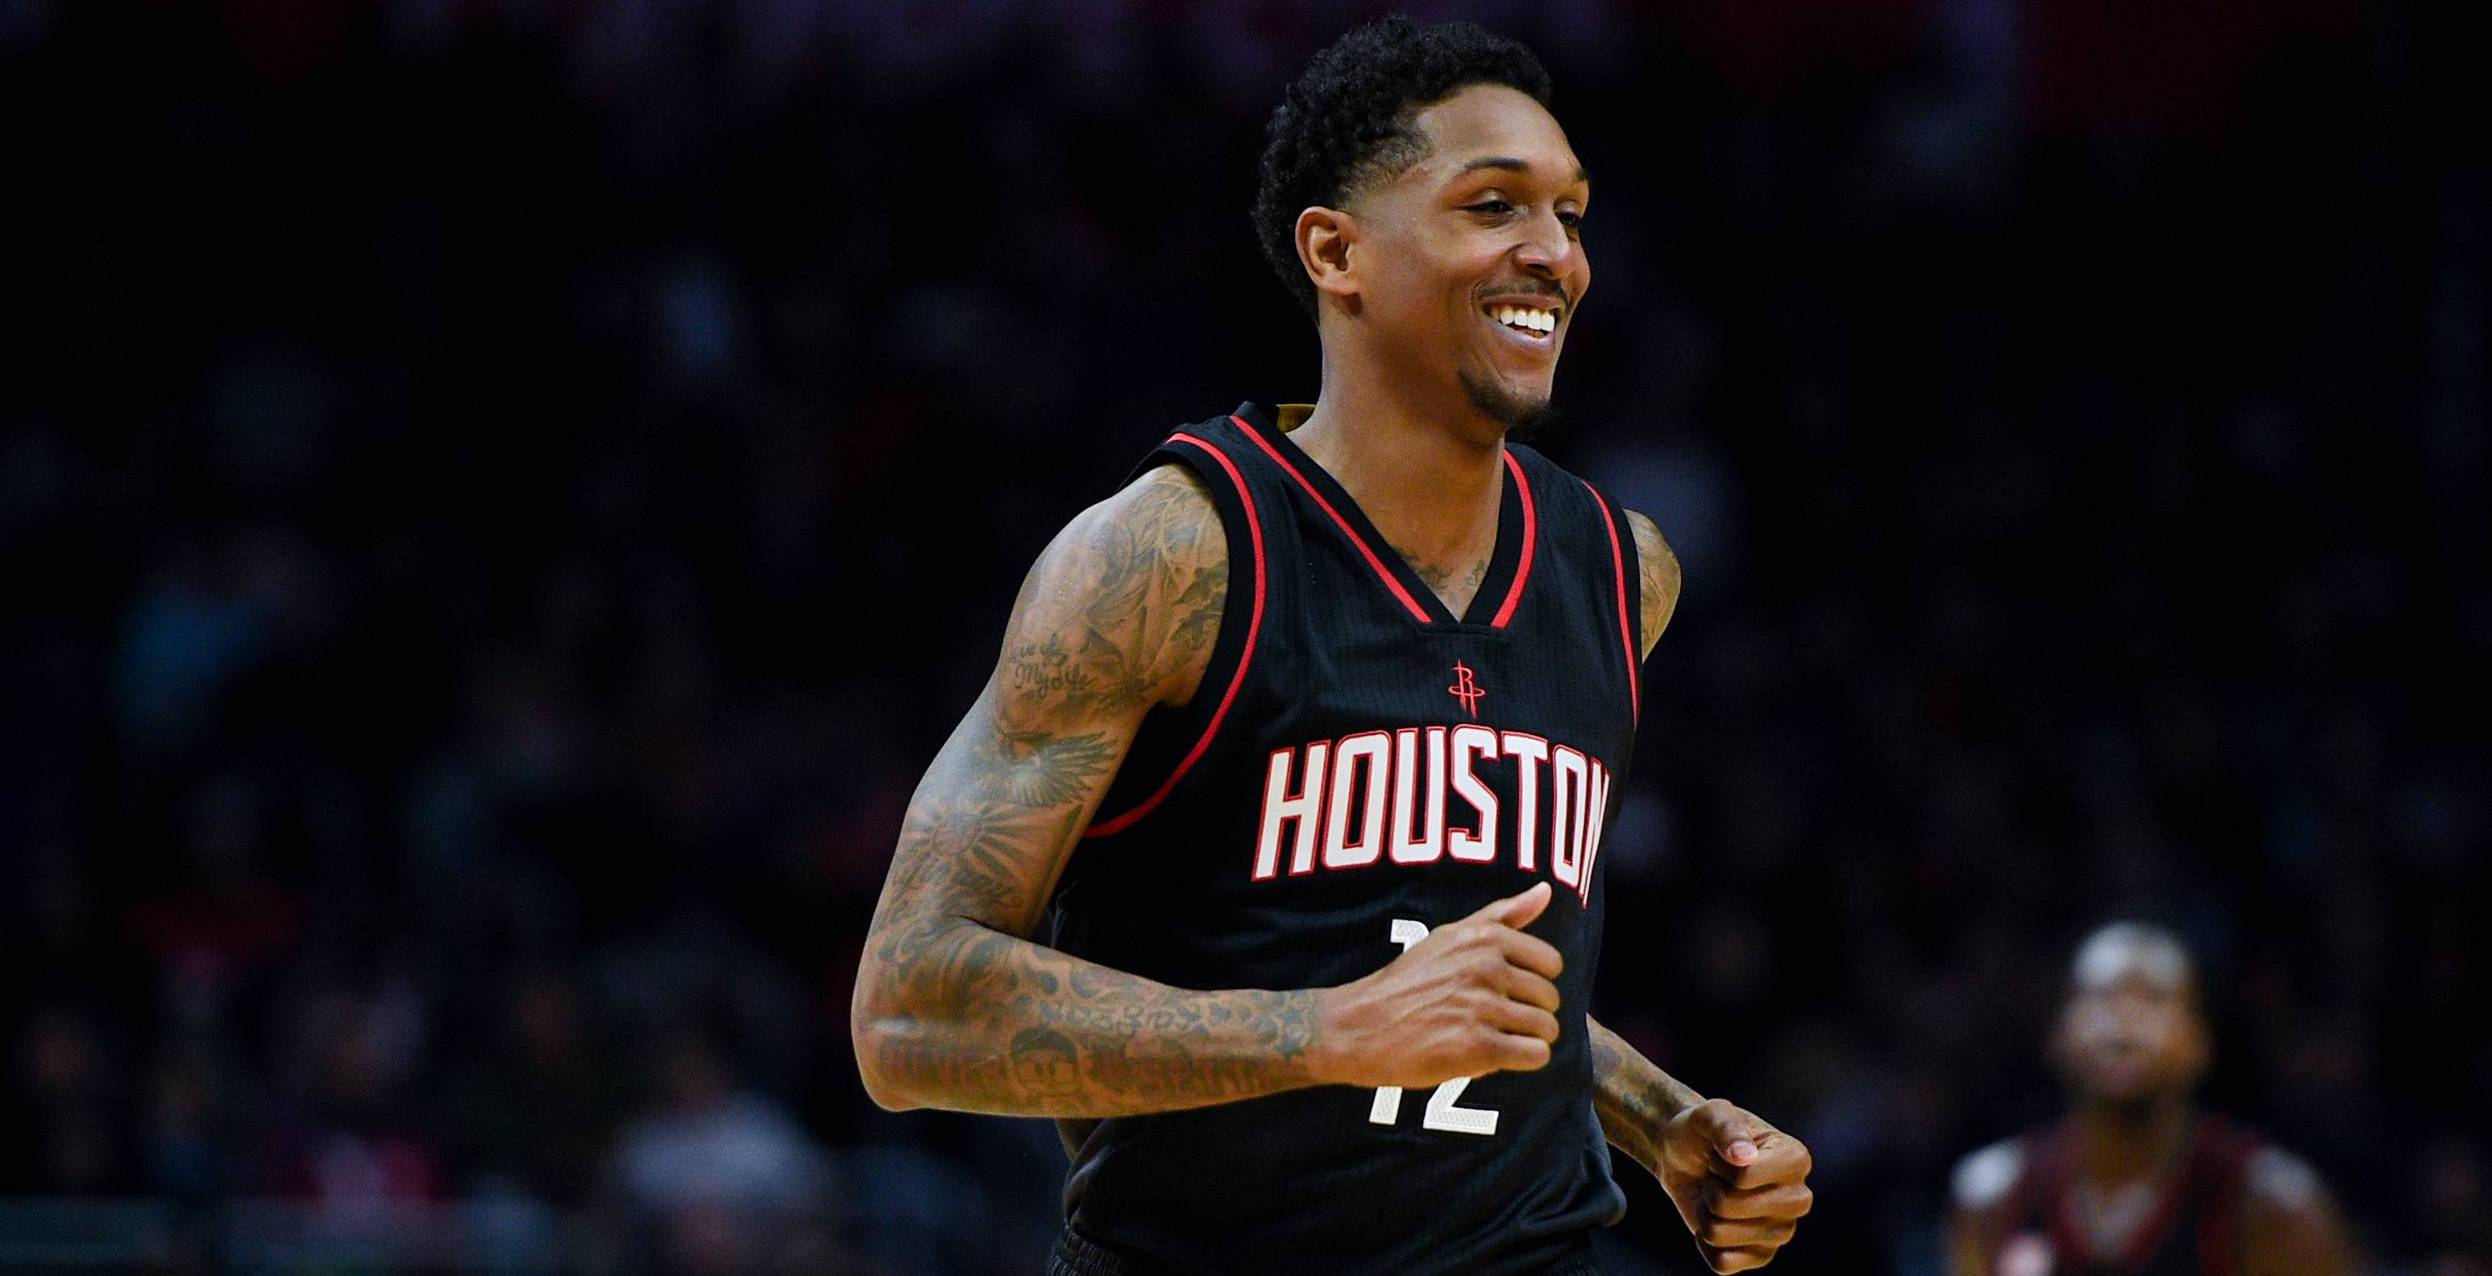 Lou Williams' funny farewell message to Rockets after being traded